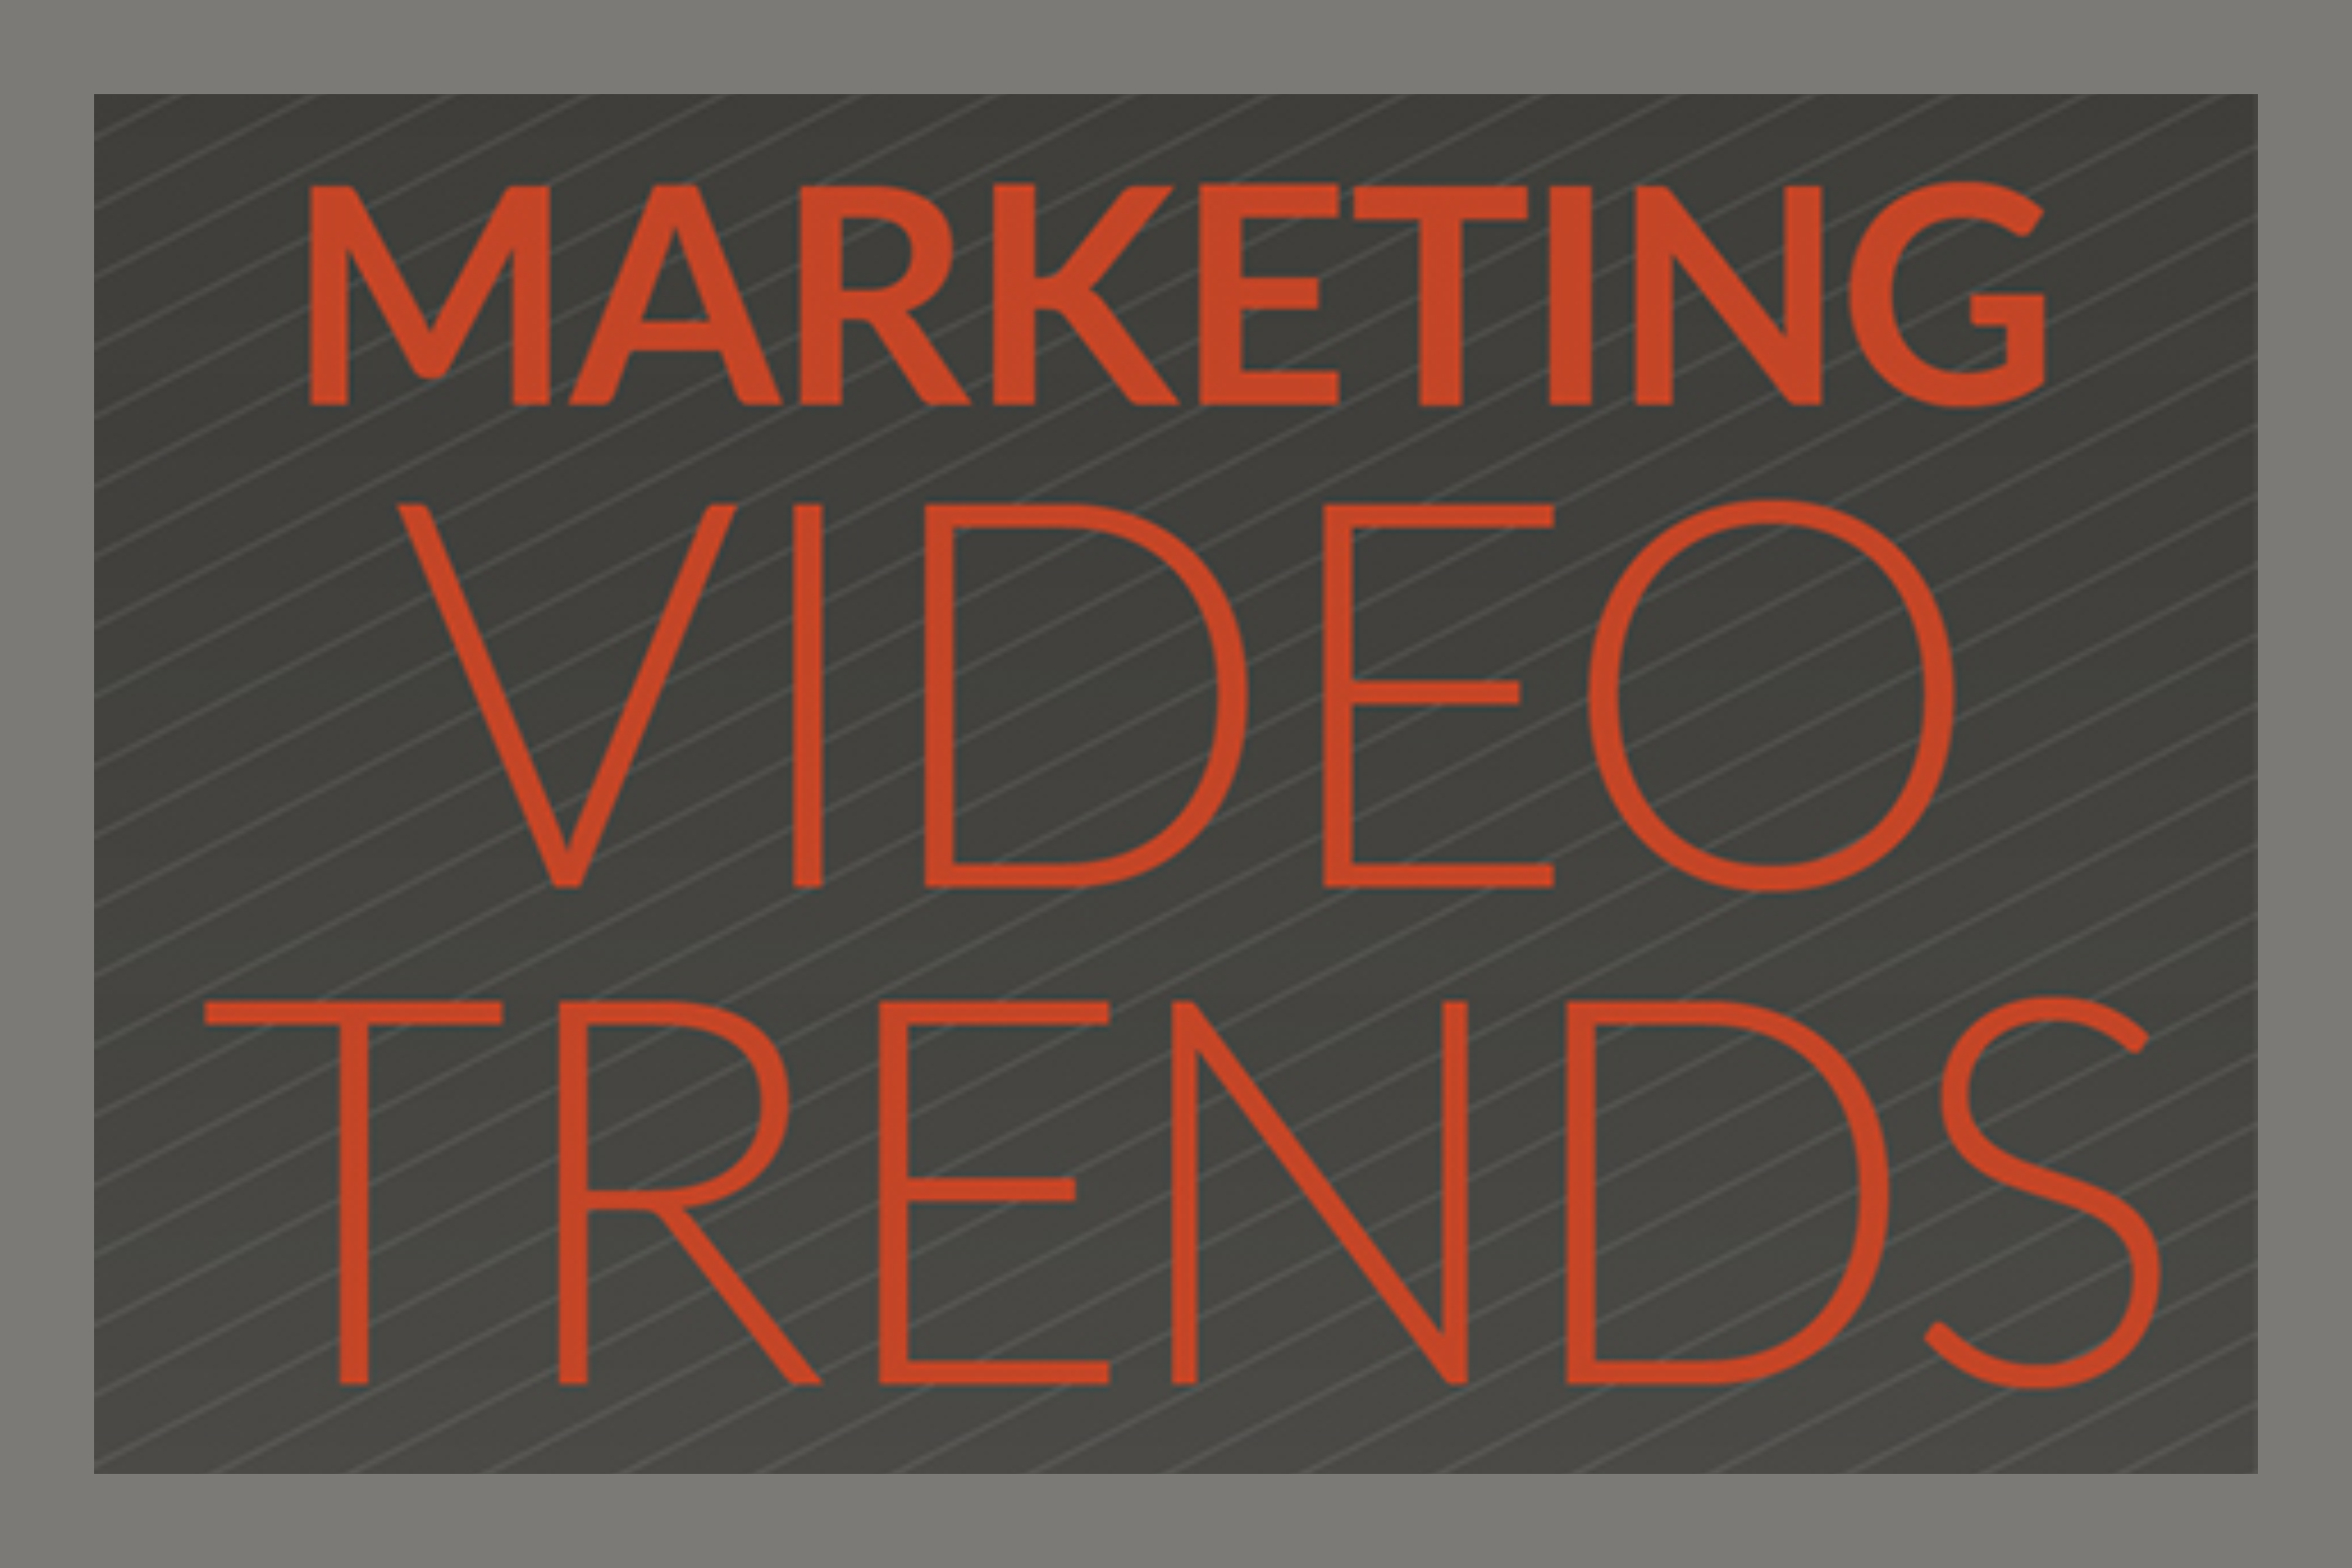 Video Trends Marketers Should Be Watching (infographic)